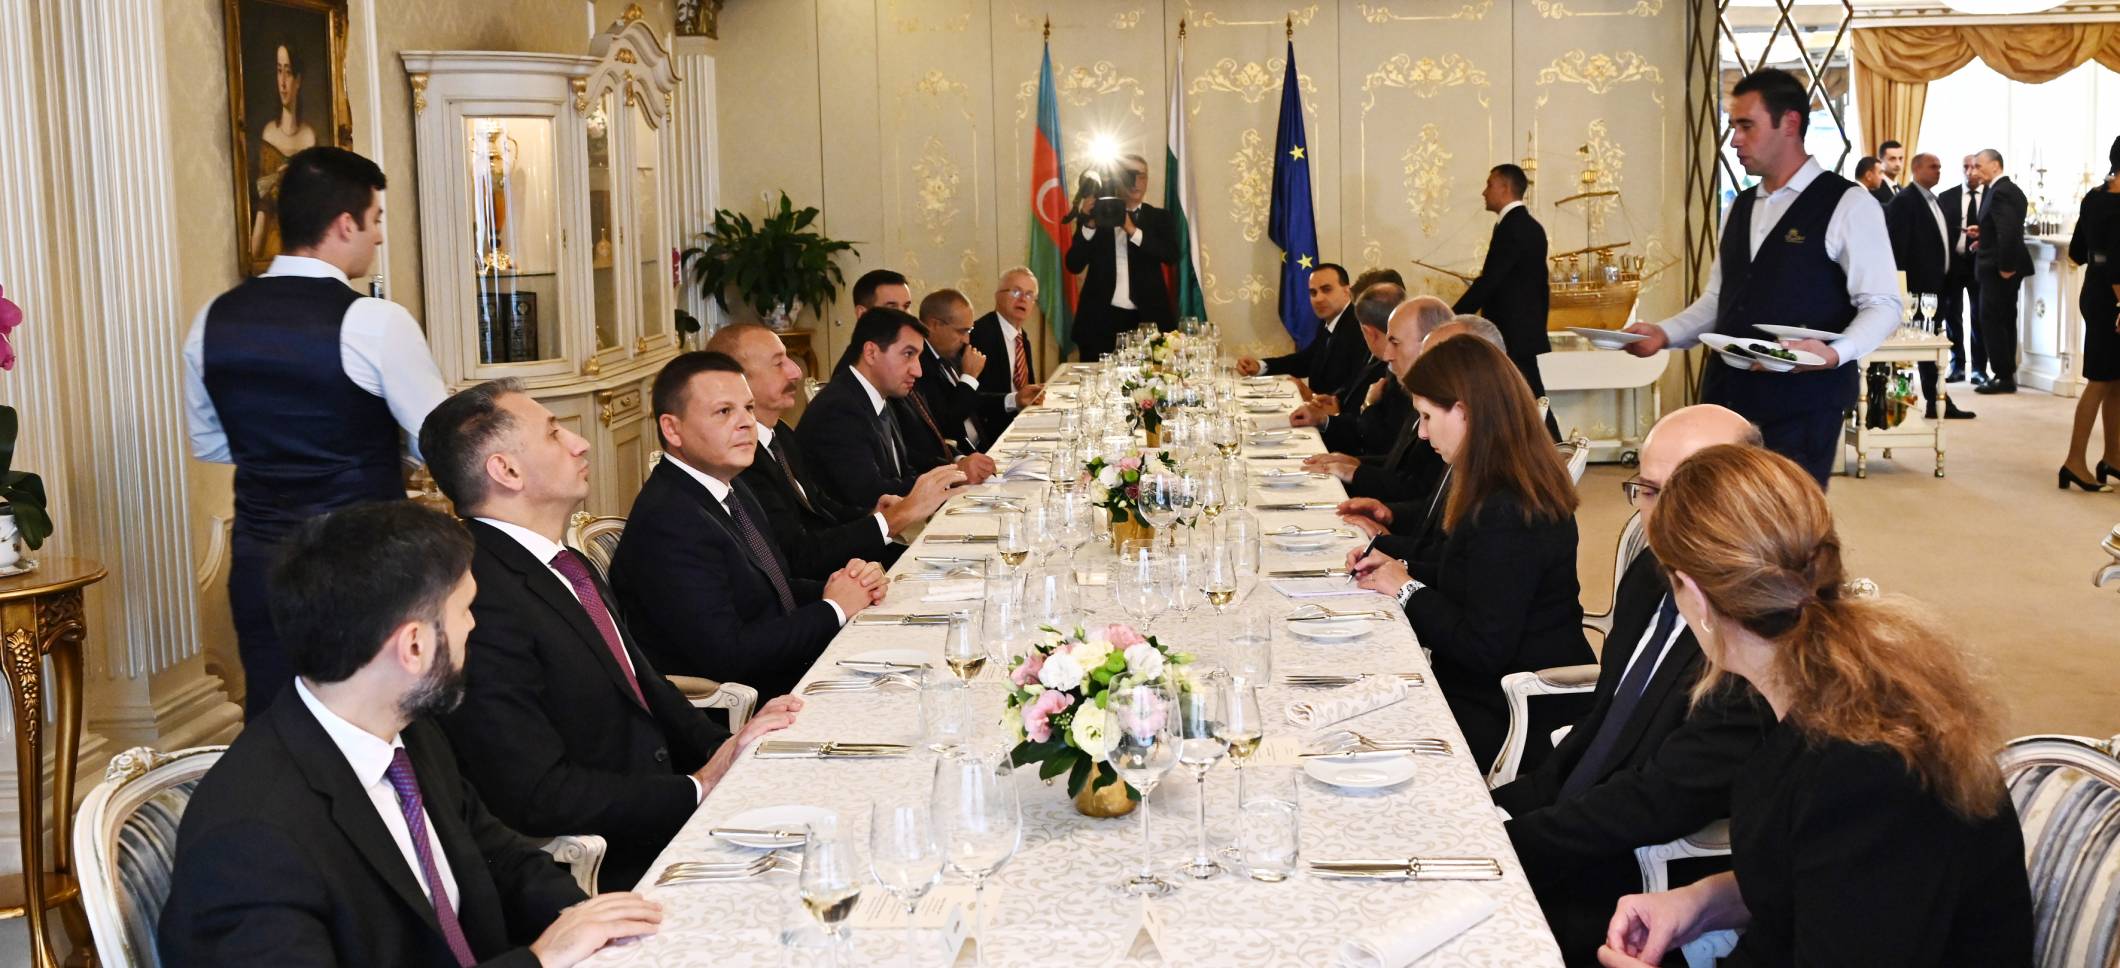 Dinner was hosted in honor of President Ilham Aliyev